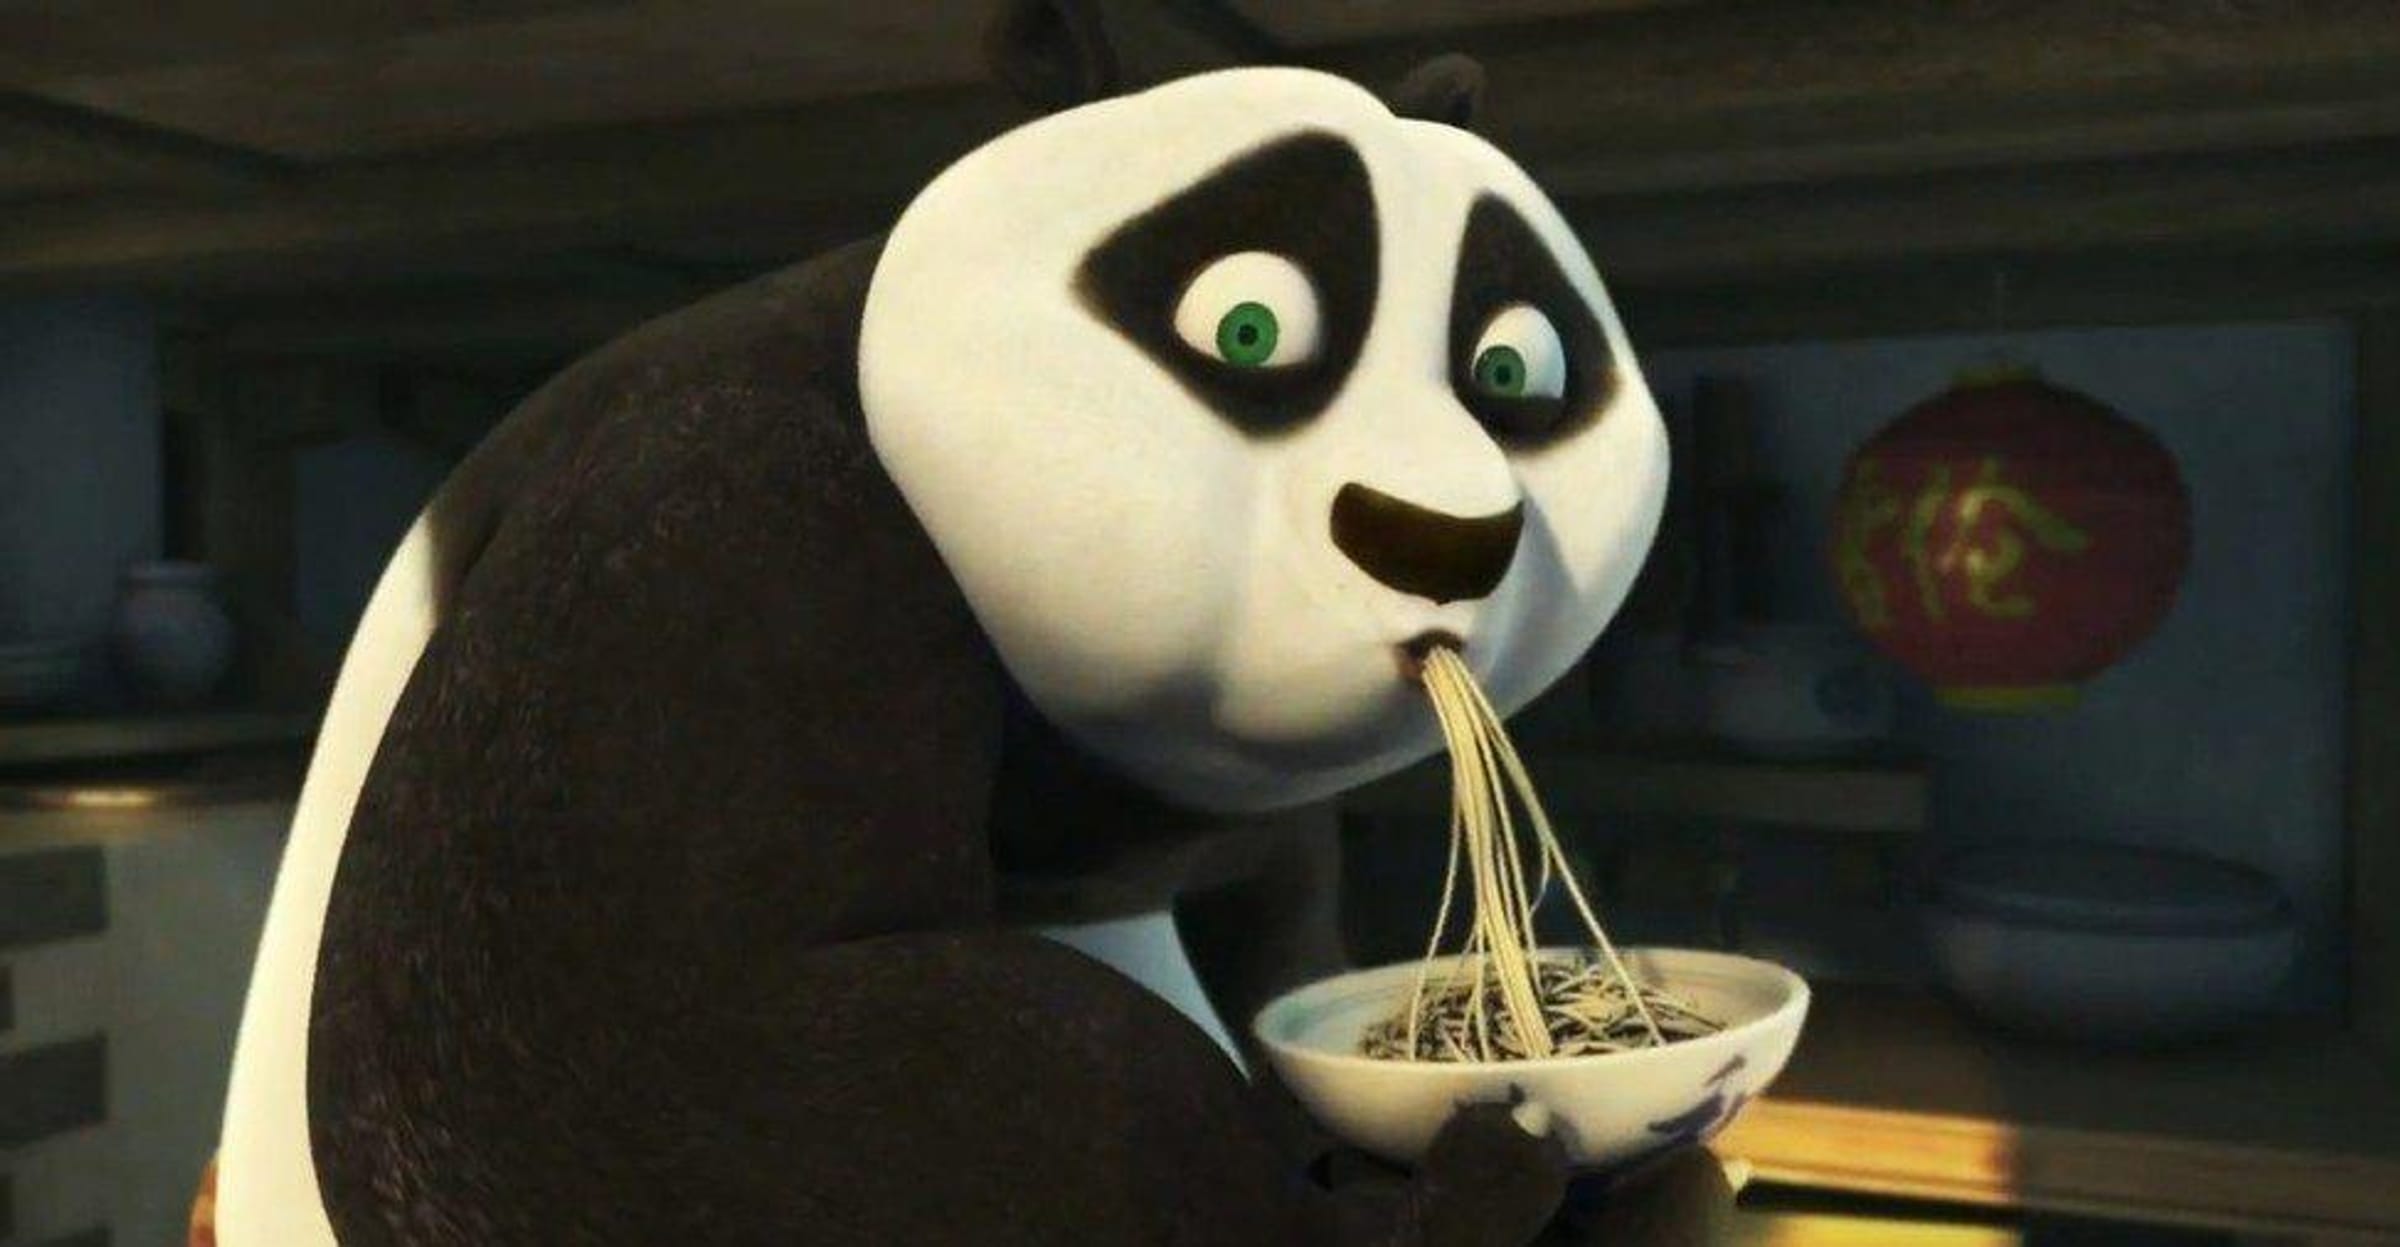 kung fu panda quotes there is no secret ingredient